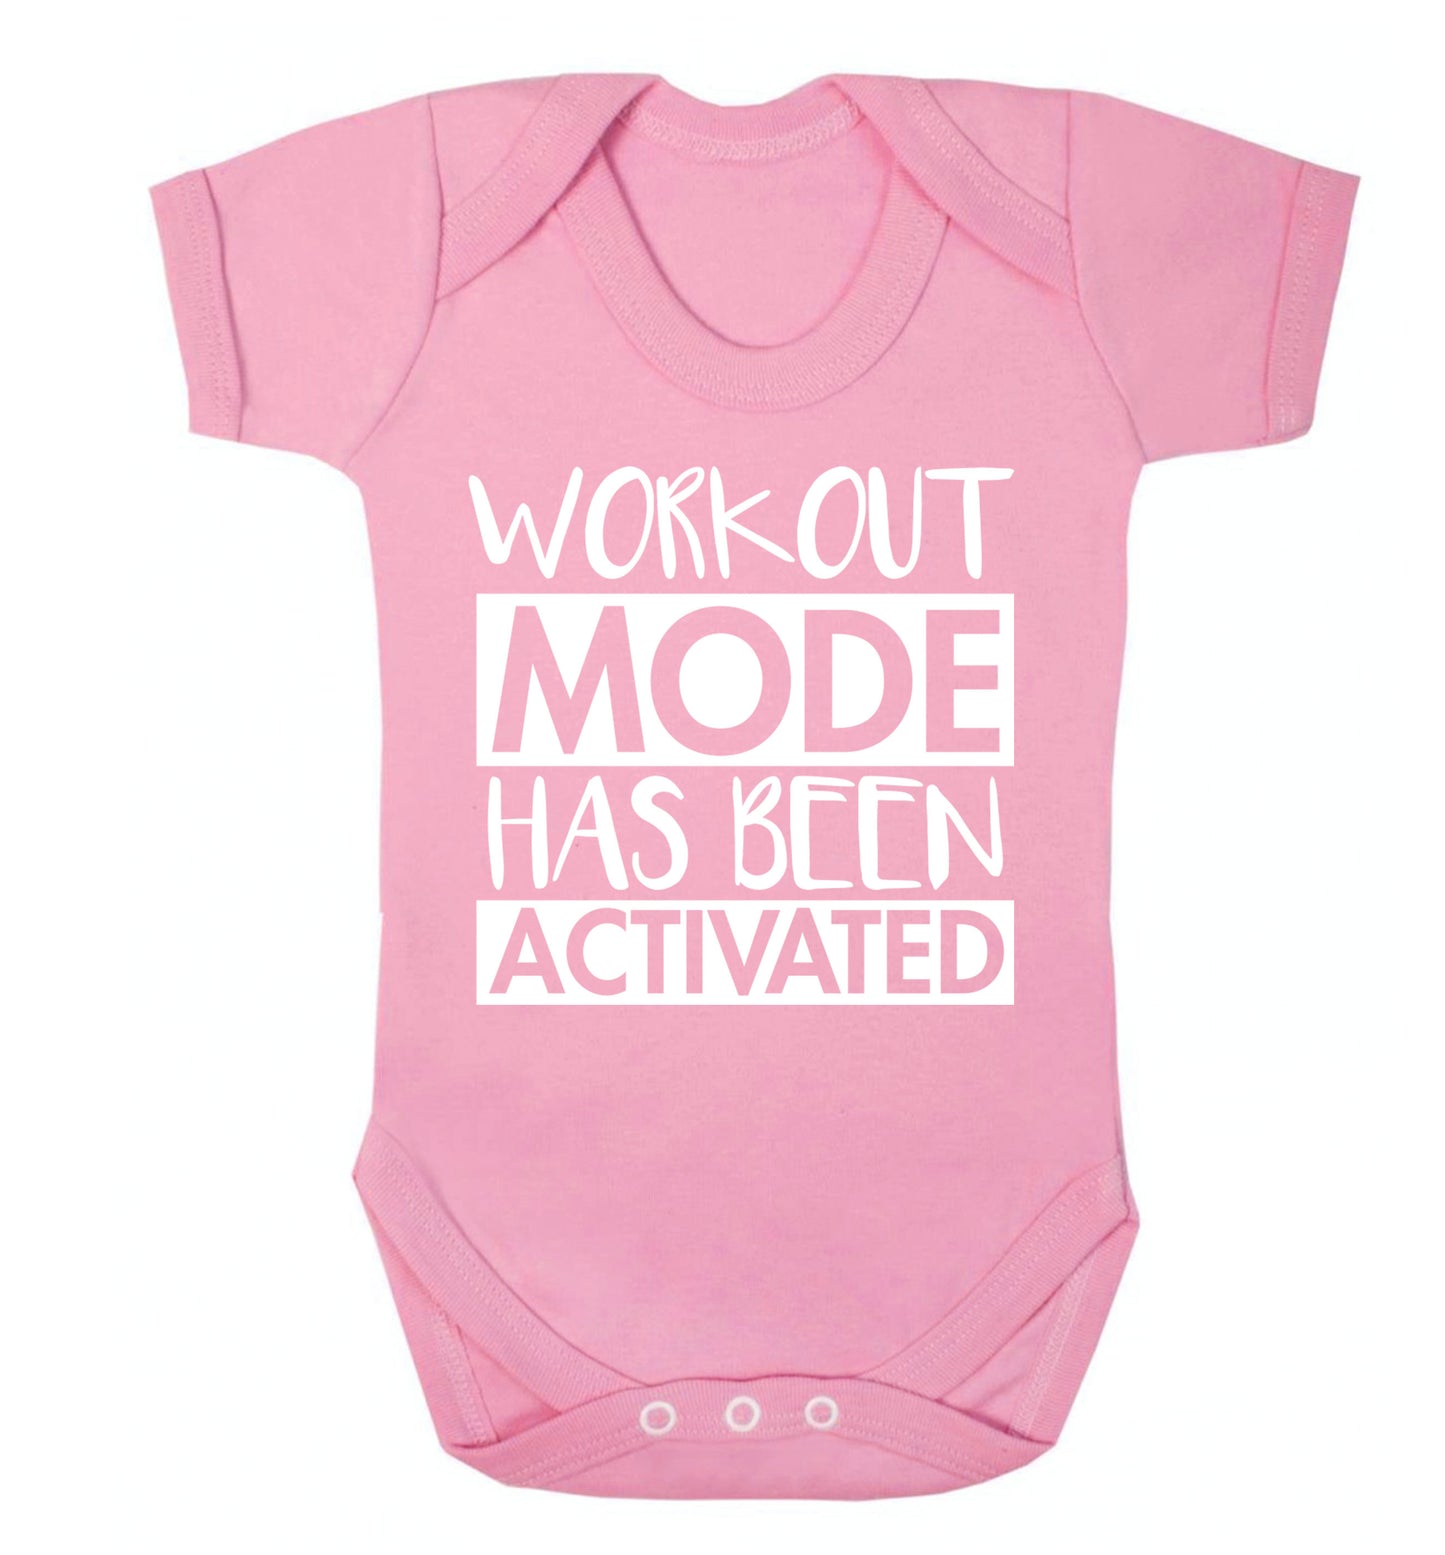 Workout mode has been activated Baby Vest pale pink 18-24 months